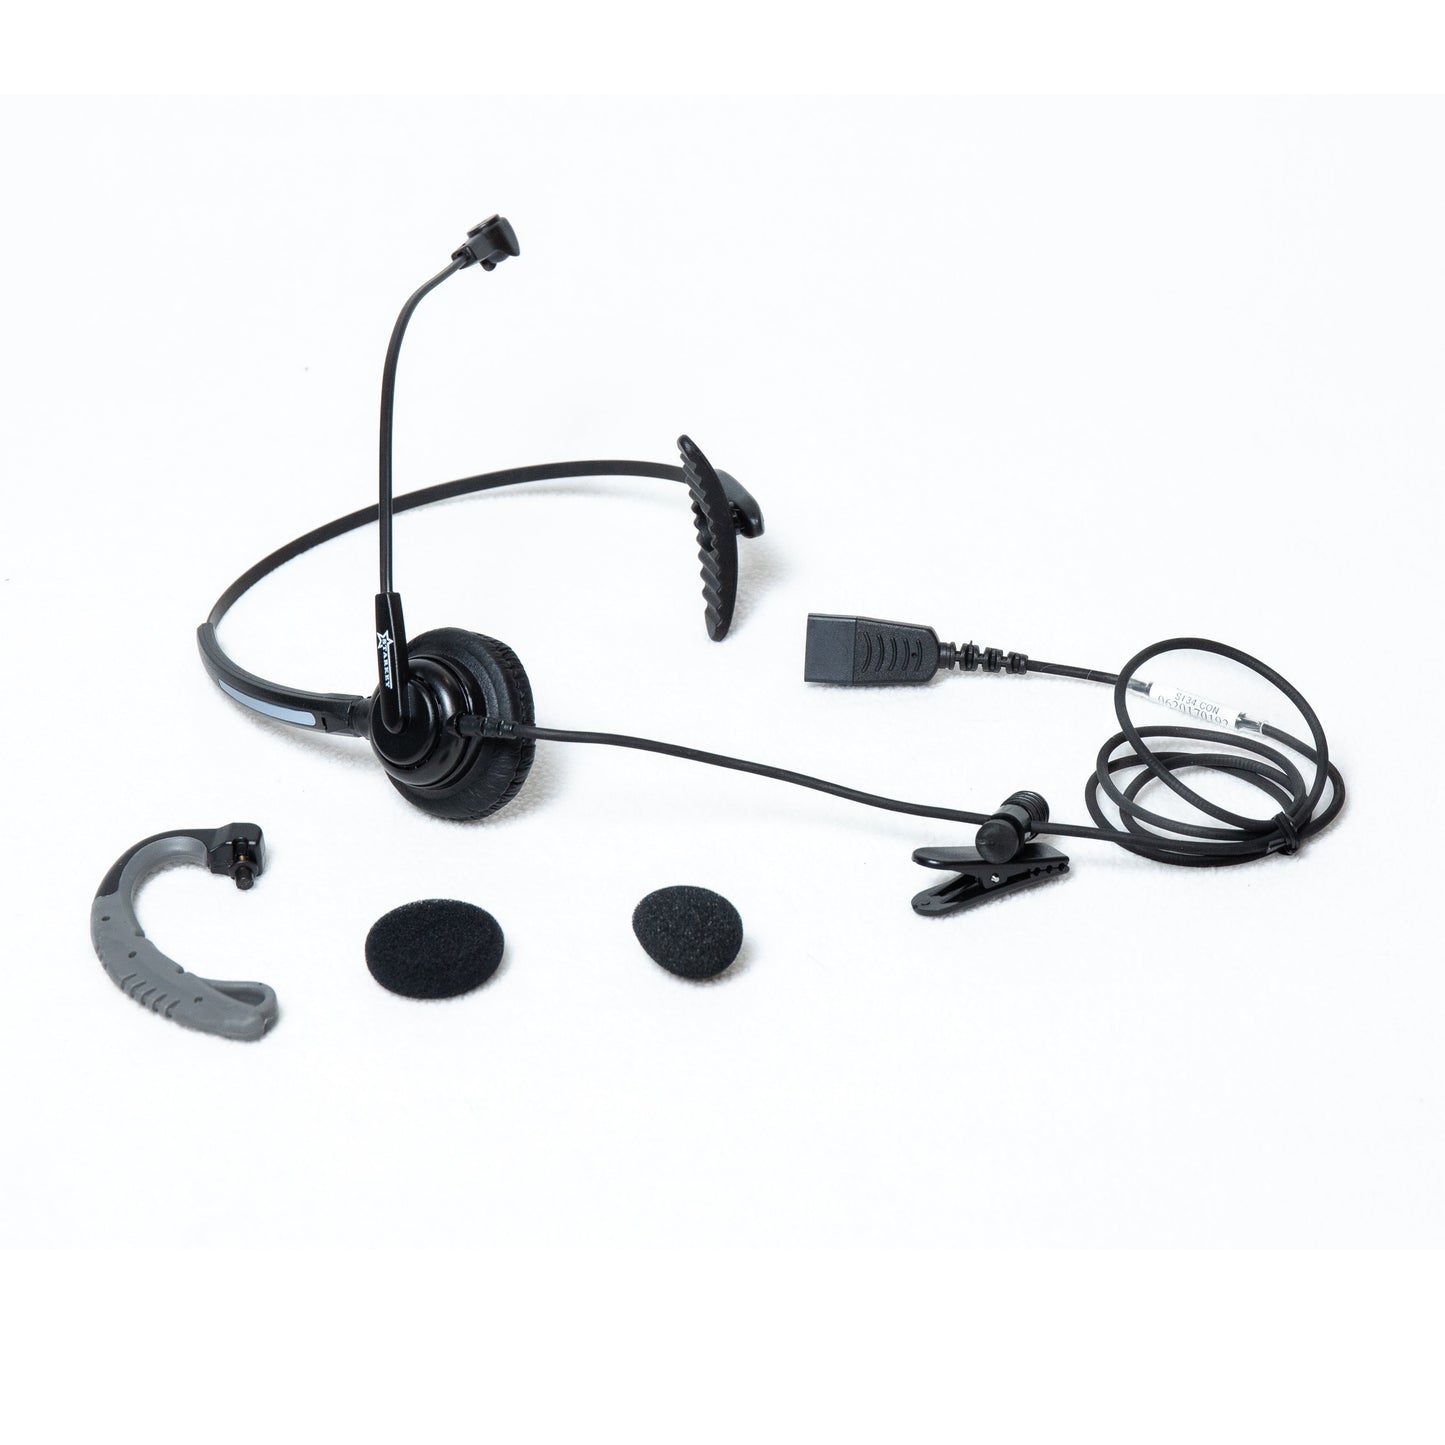 Starkey S134-CON-GN Convertible Headset with Passive Noise Canceling Mic (Cord sold separately.)